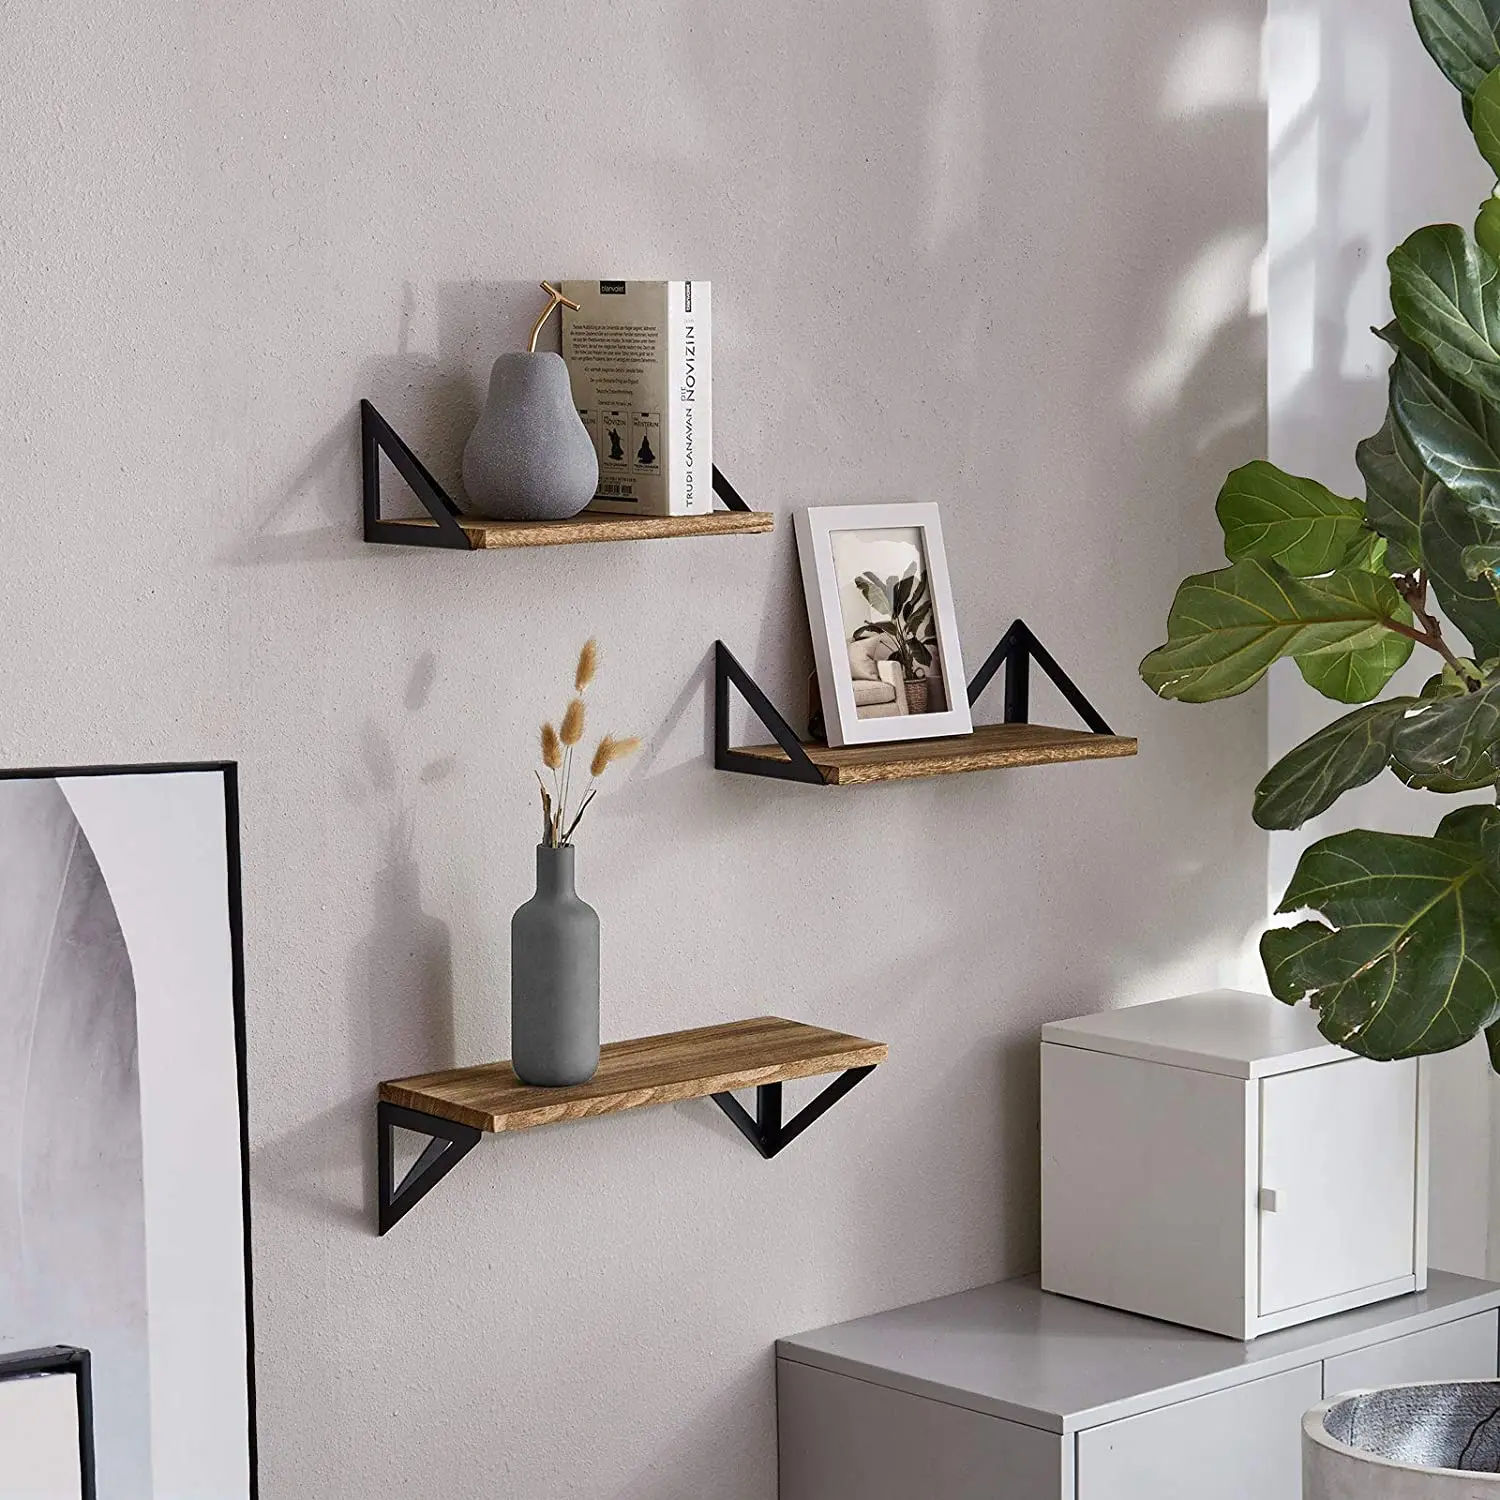 Floating Shelves Wall Mounted Rustic Wood Wall Shelves Set Of 3 For ...